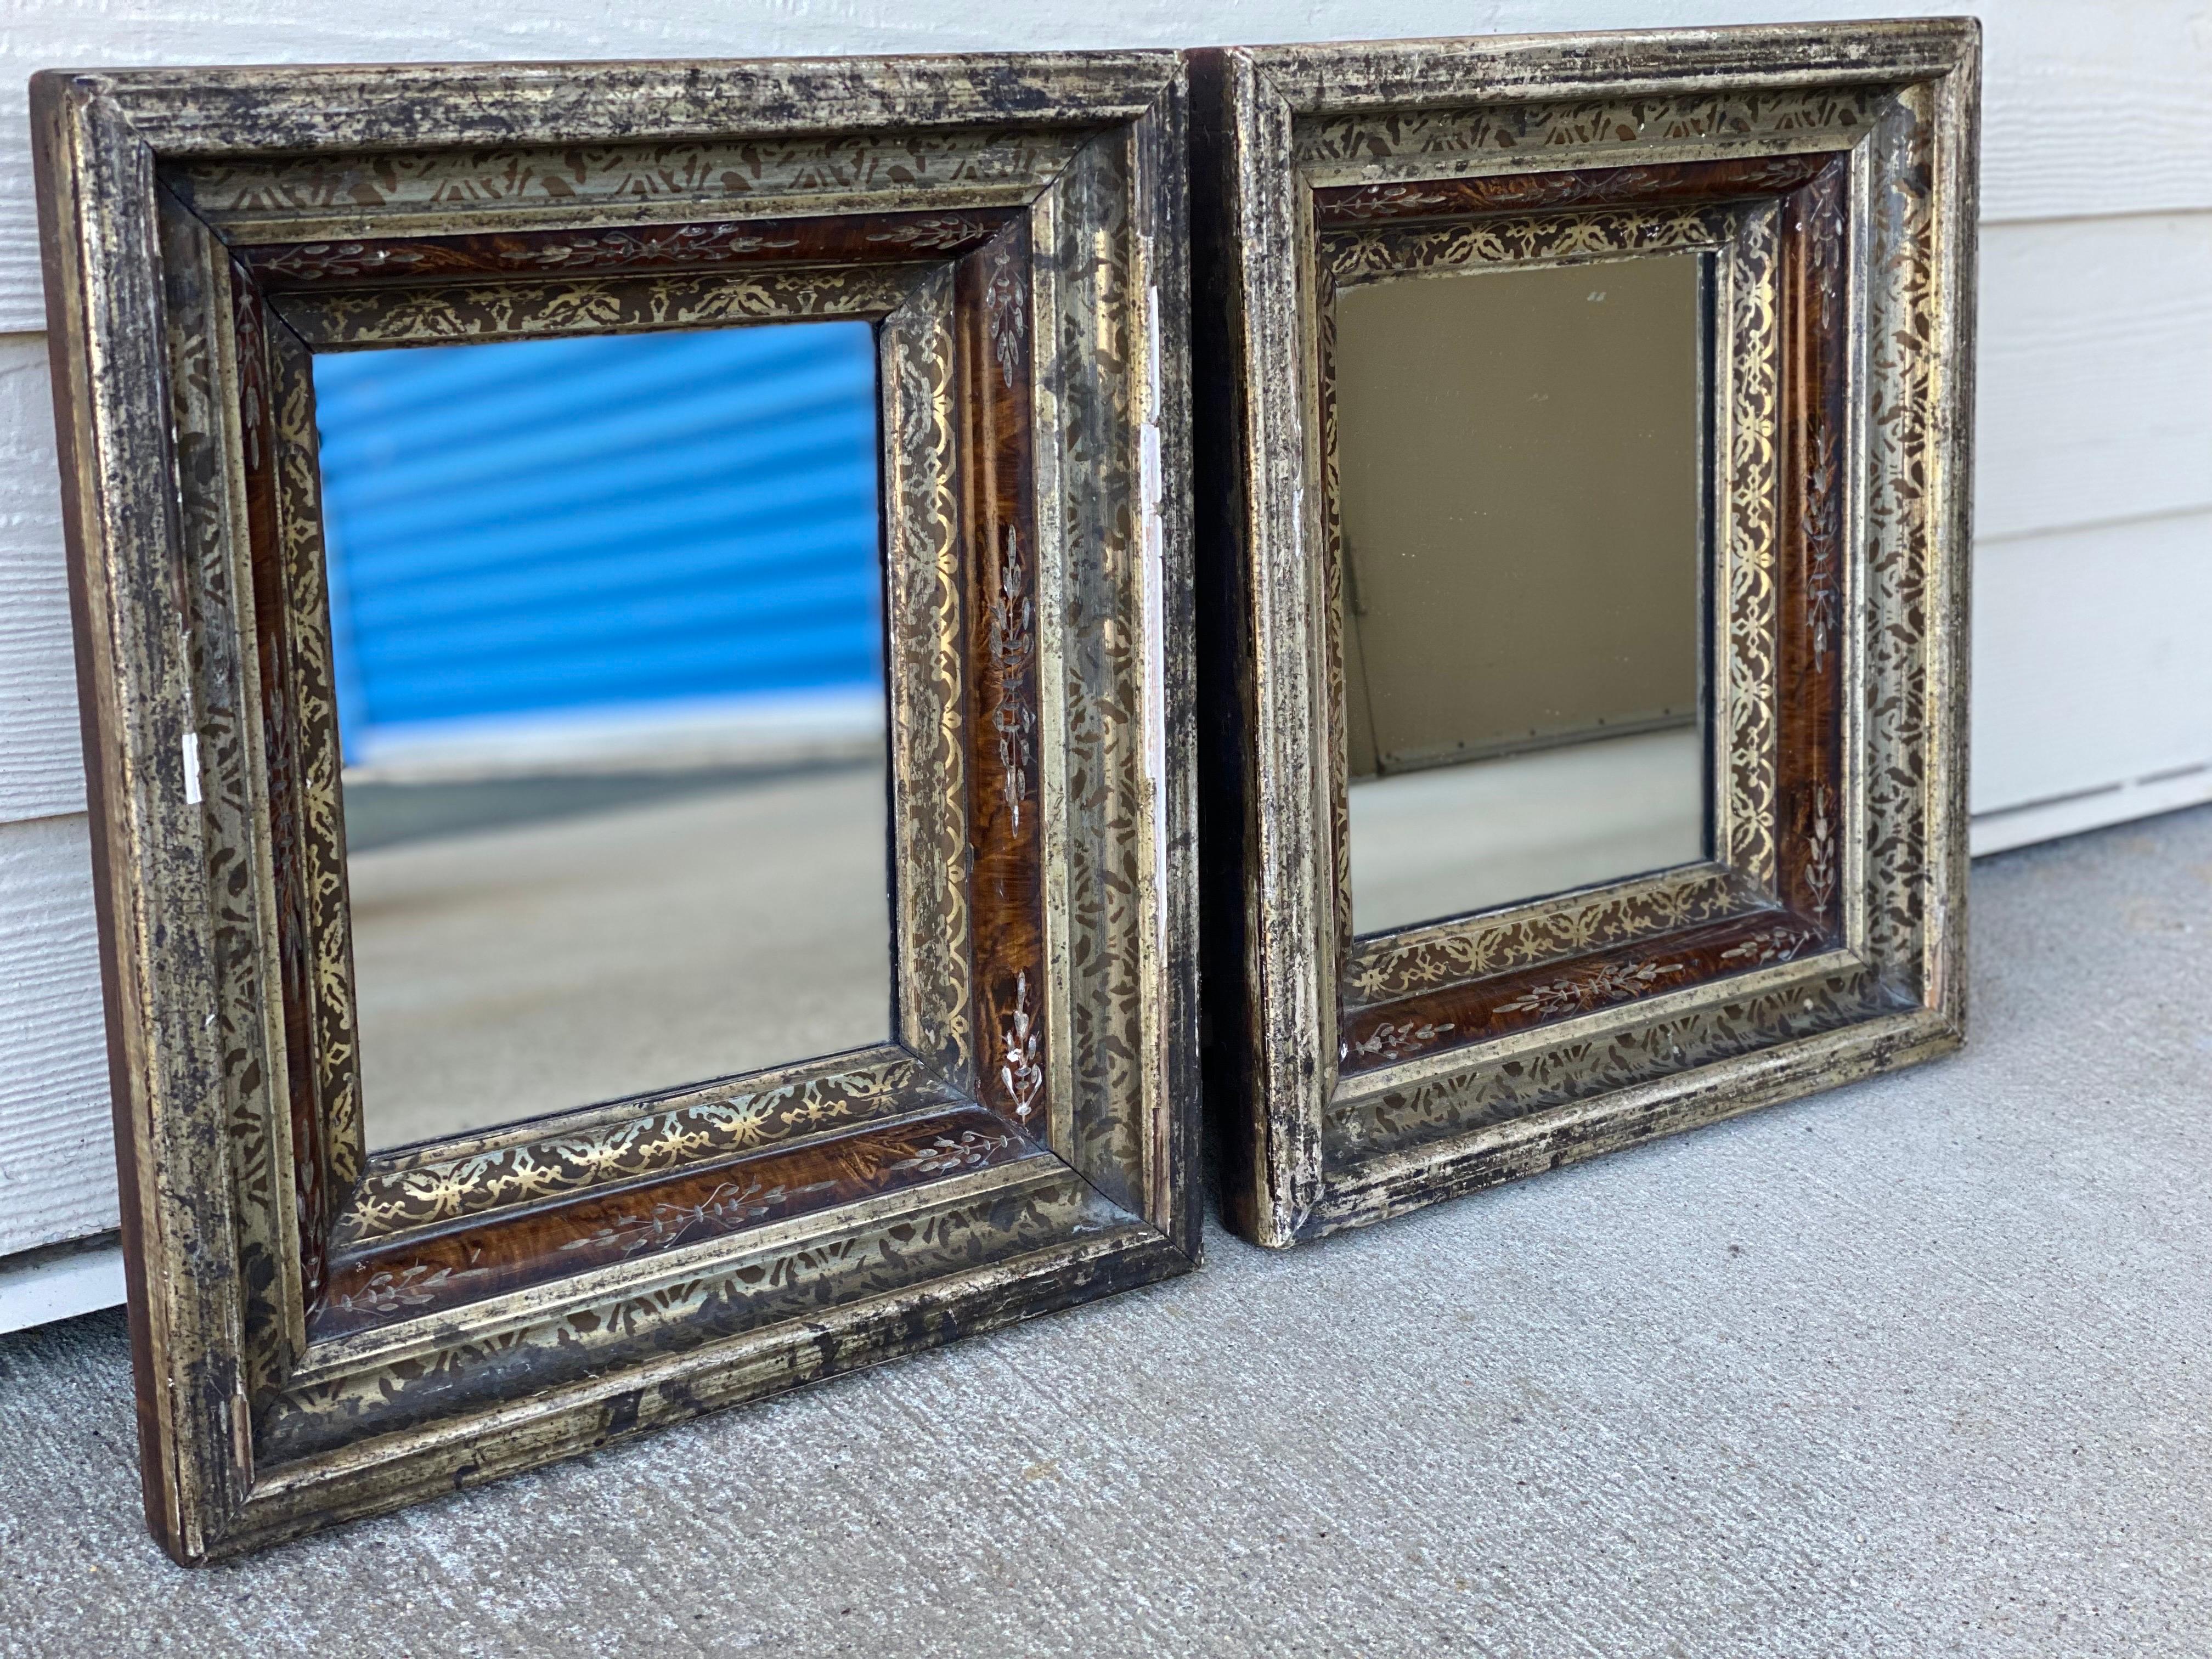 Pair of late 19th century small silver-gilt & faux tortoise shell patterned mirrors
A handsome pair of silver gilt mirrors, inset tortoise with incised design with a painted patterned design overlaying the entire frame. Some minor losses to the